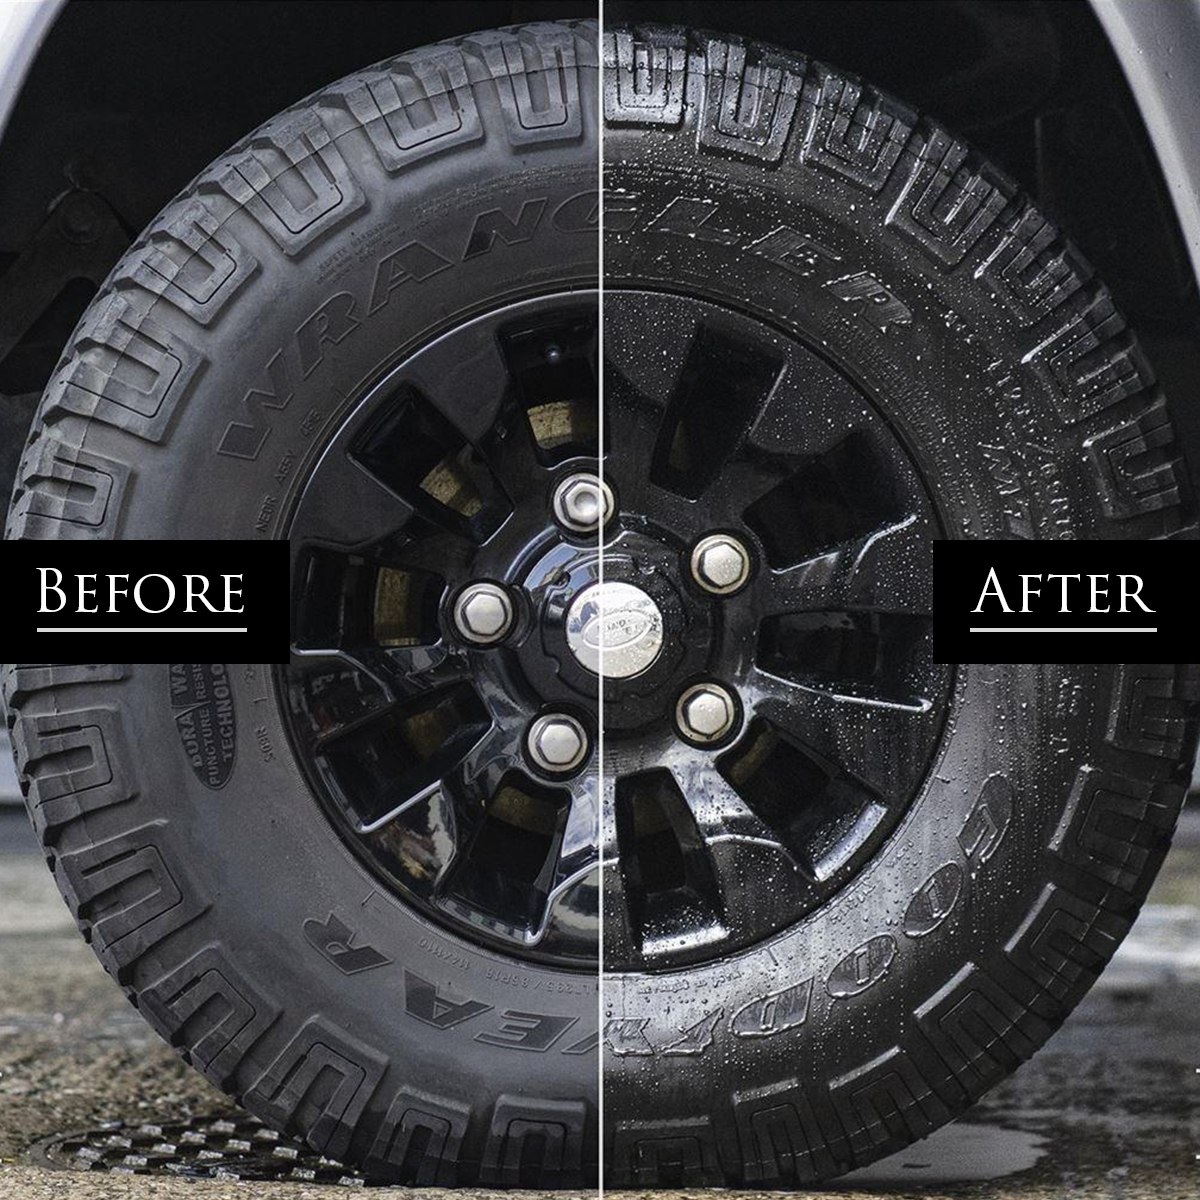 Image shows before and after of using Car Gods Wheel Perfection and Black Angel Tyre Glaze. Before use the wheel is dirty and dull, after use the wheel has a bold depth of colour and brilliant shine.